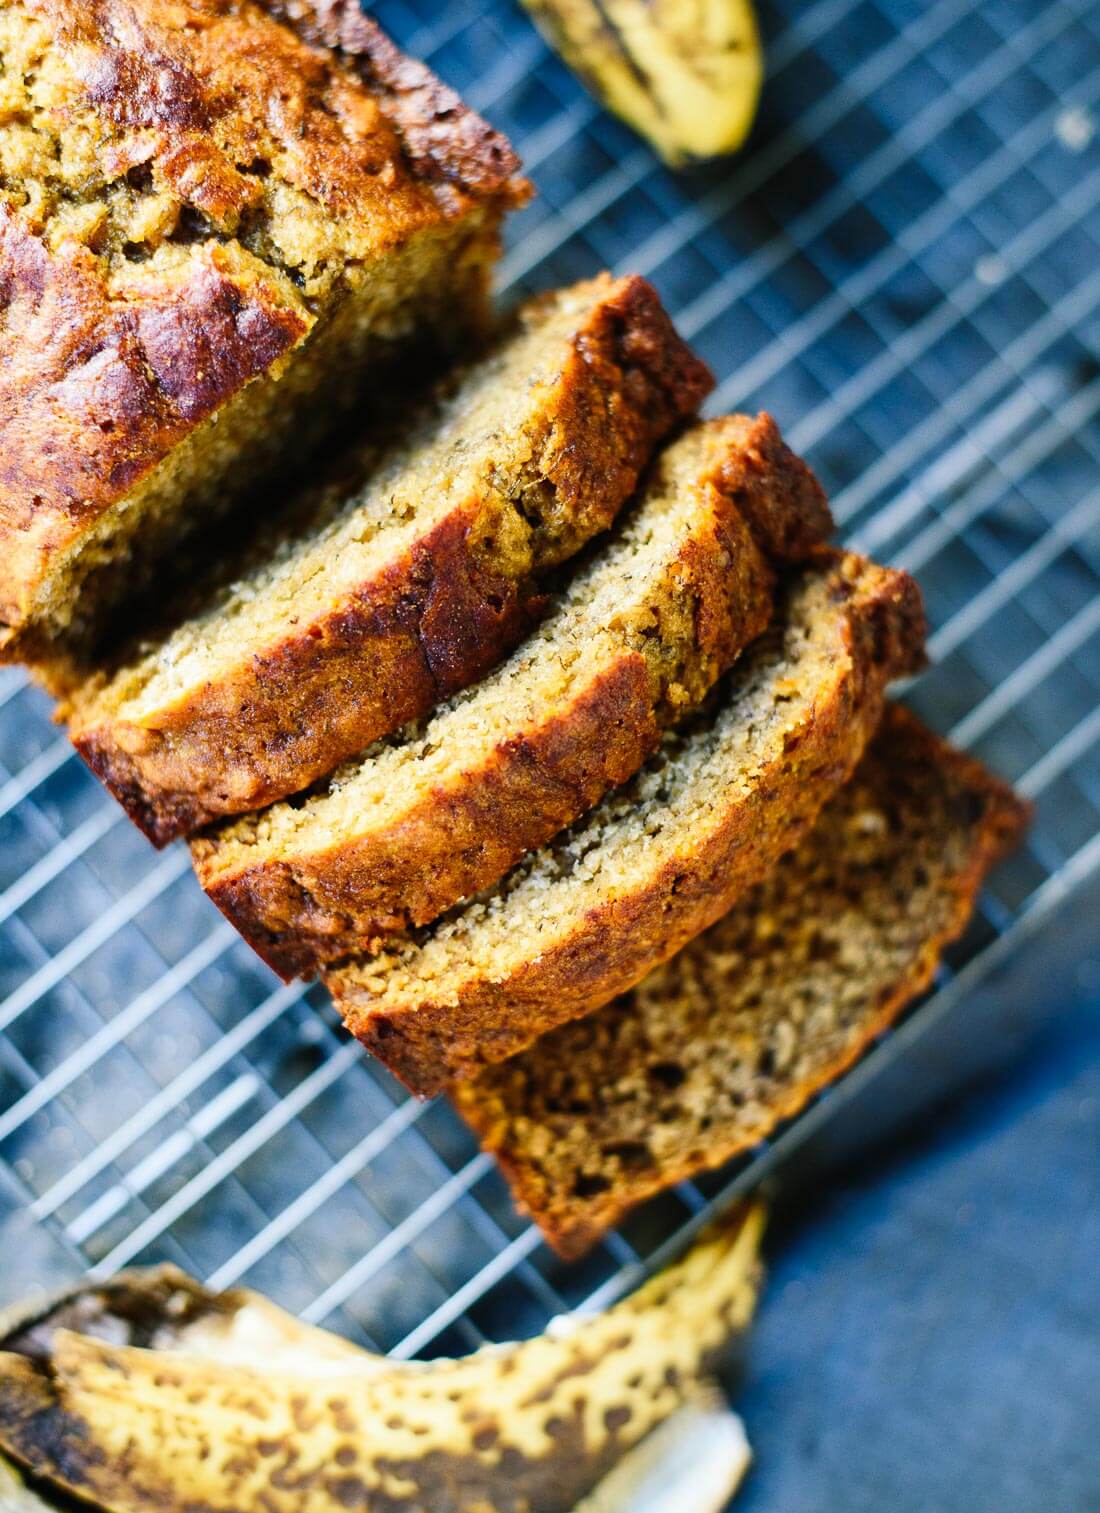 Healthy banana bread—it's so fluffy, moist and delicious that no one will be able to tell! cookieandkate.com